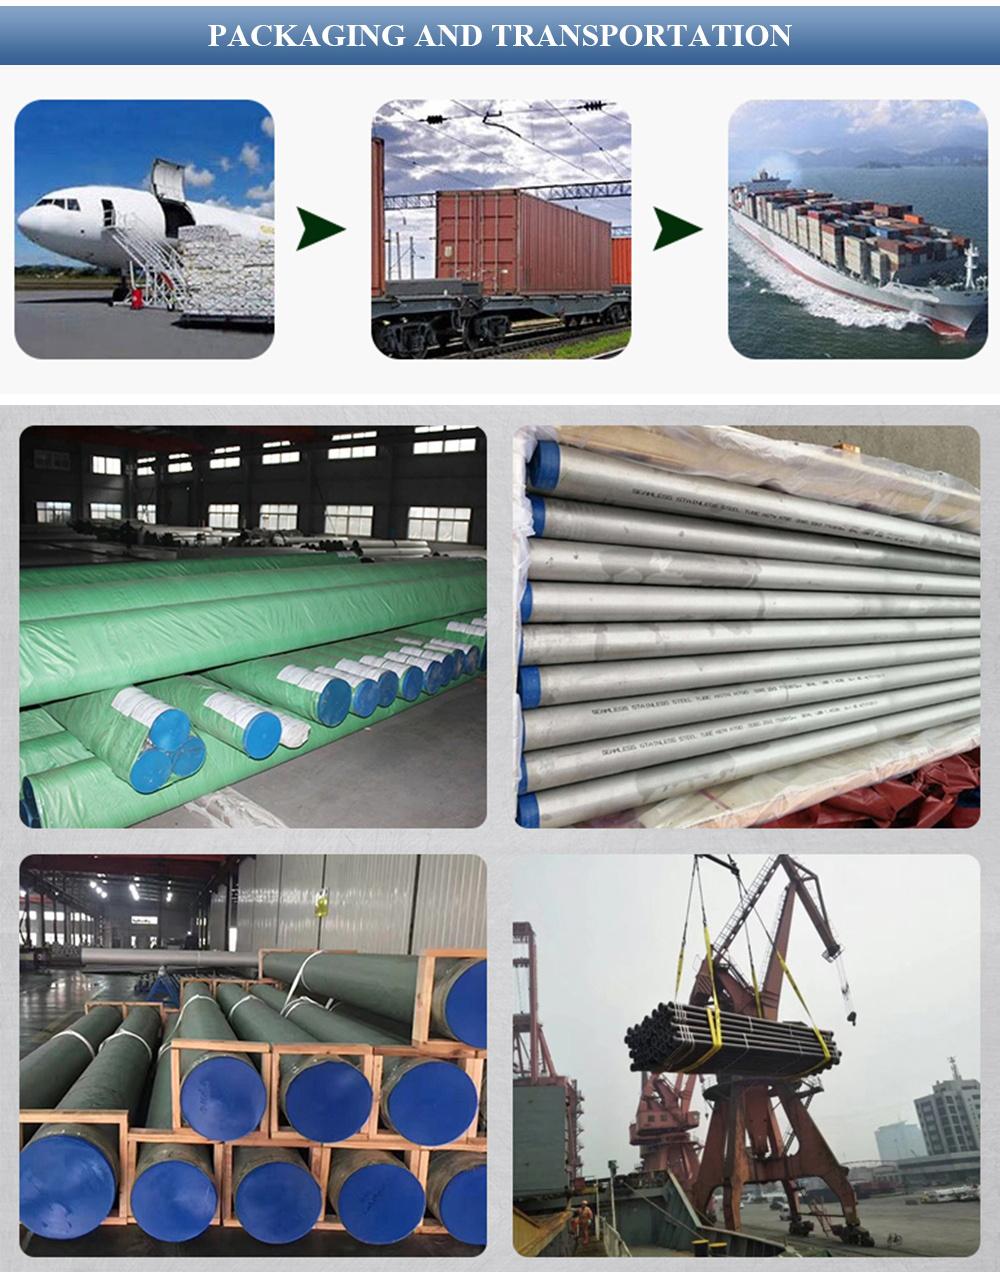 Austenitic Stainless Steel Pipe Stainless Pipe 304 Grade Austenitic Stainless Steel Pipe Boiler Tube Piping Price